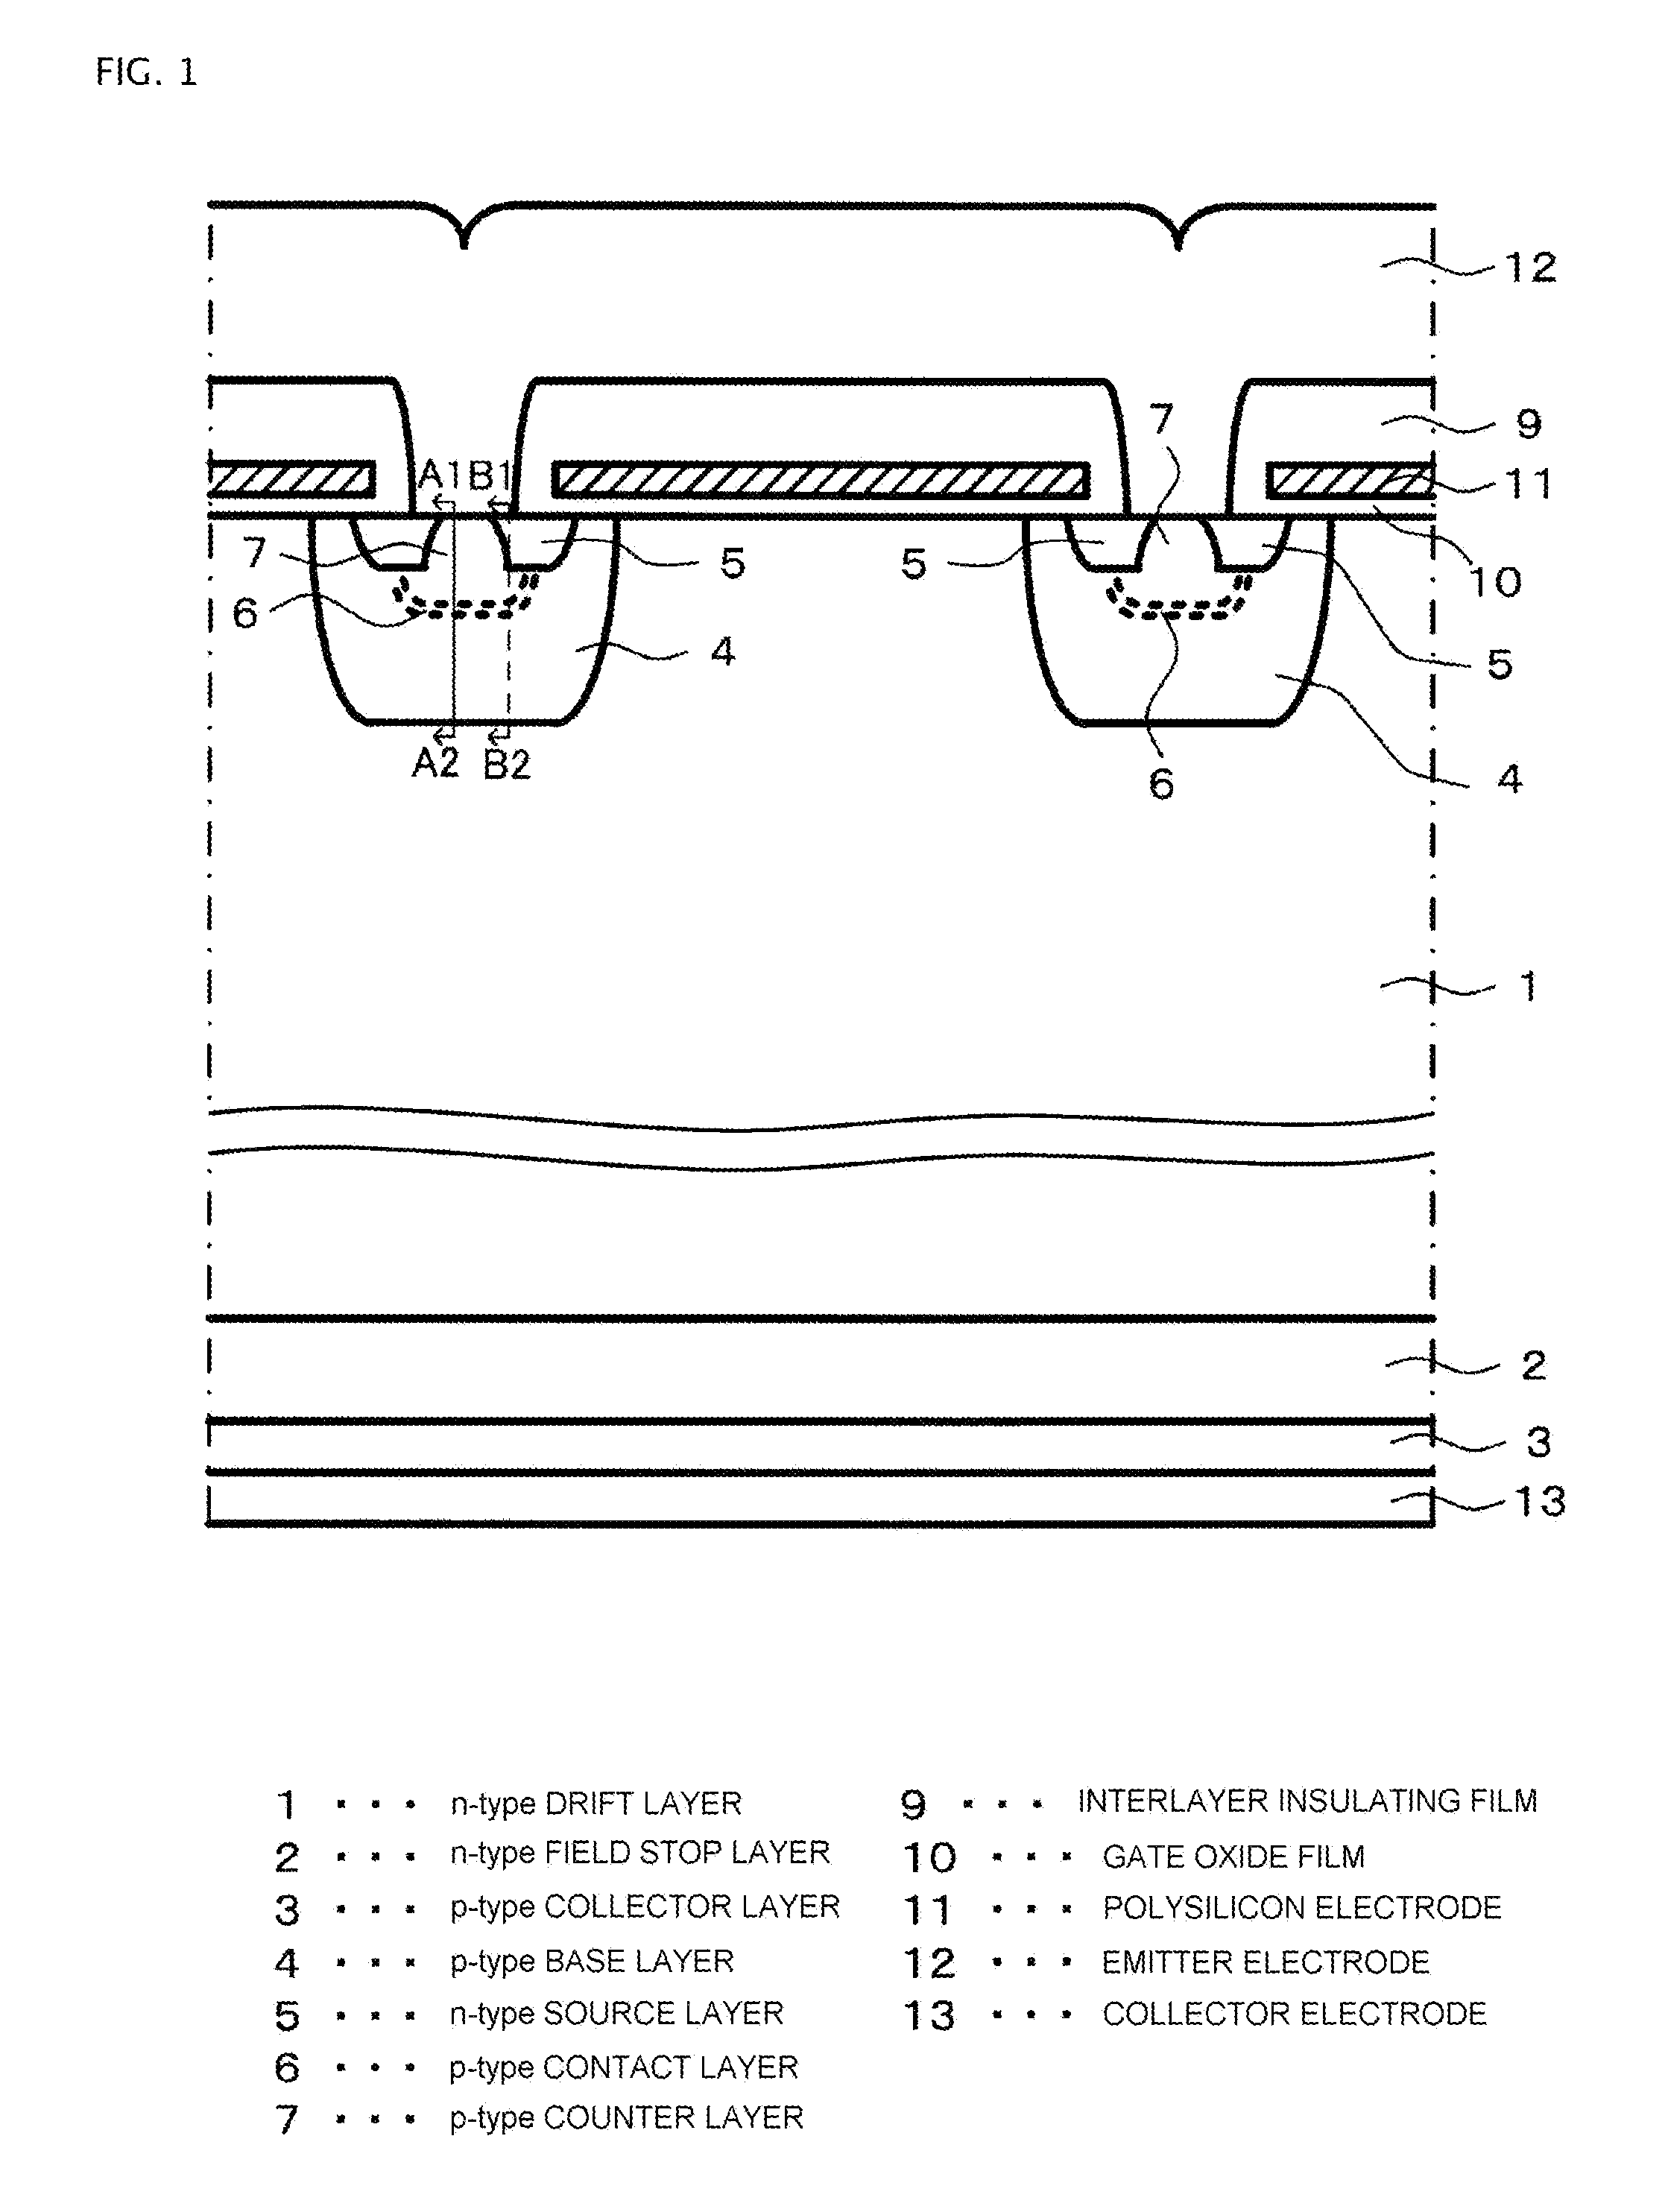 Semiconductor device including a counter layer, for power conversion and method of manufacturing the same